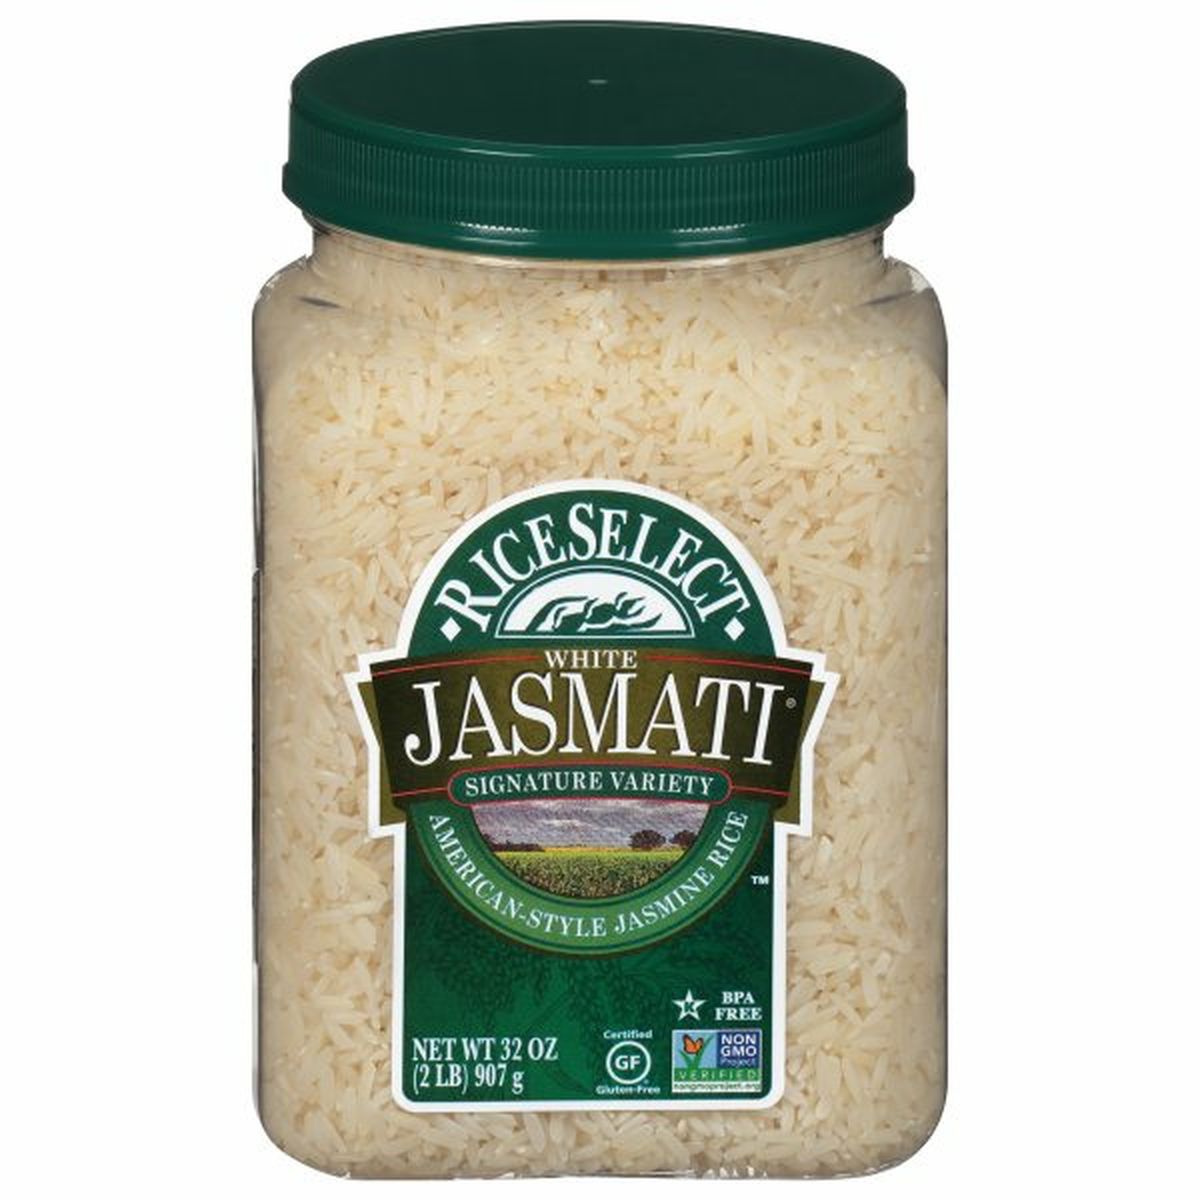 Calories in RiceSelect Jasmati, White